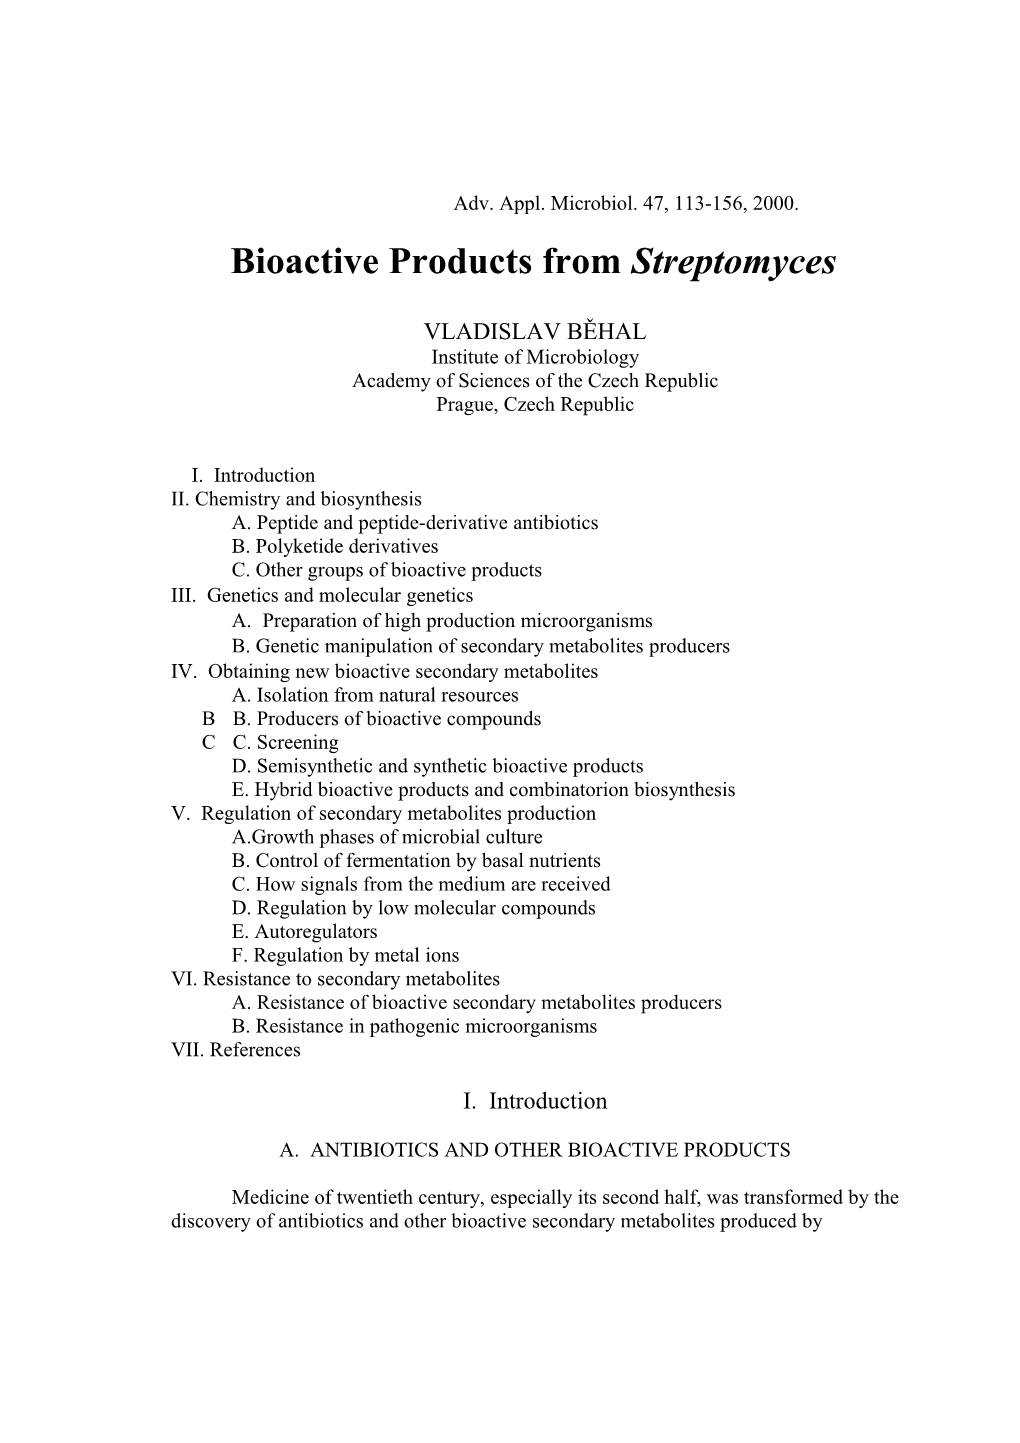 Bioactive Products from Streptomyces